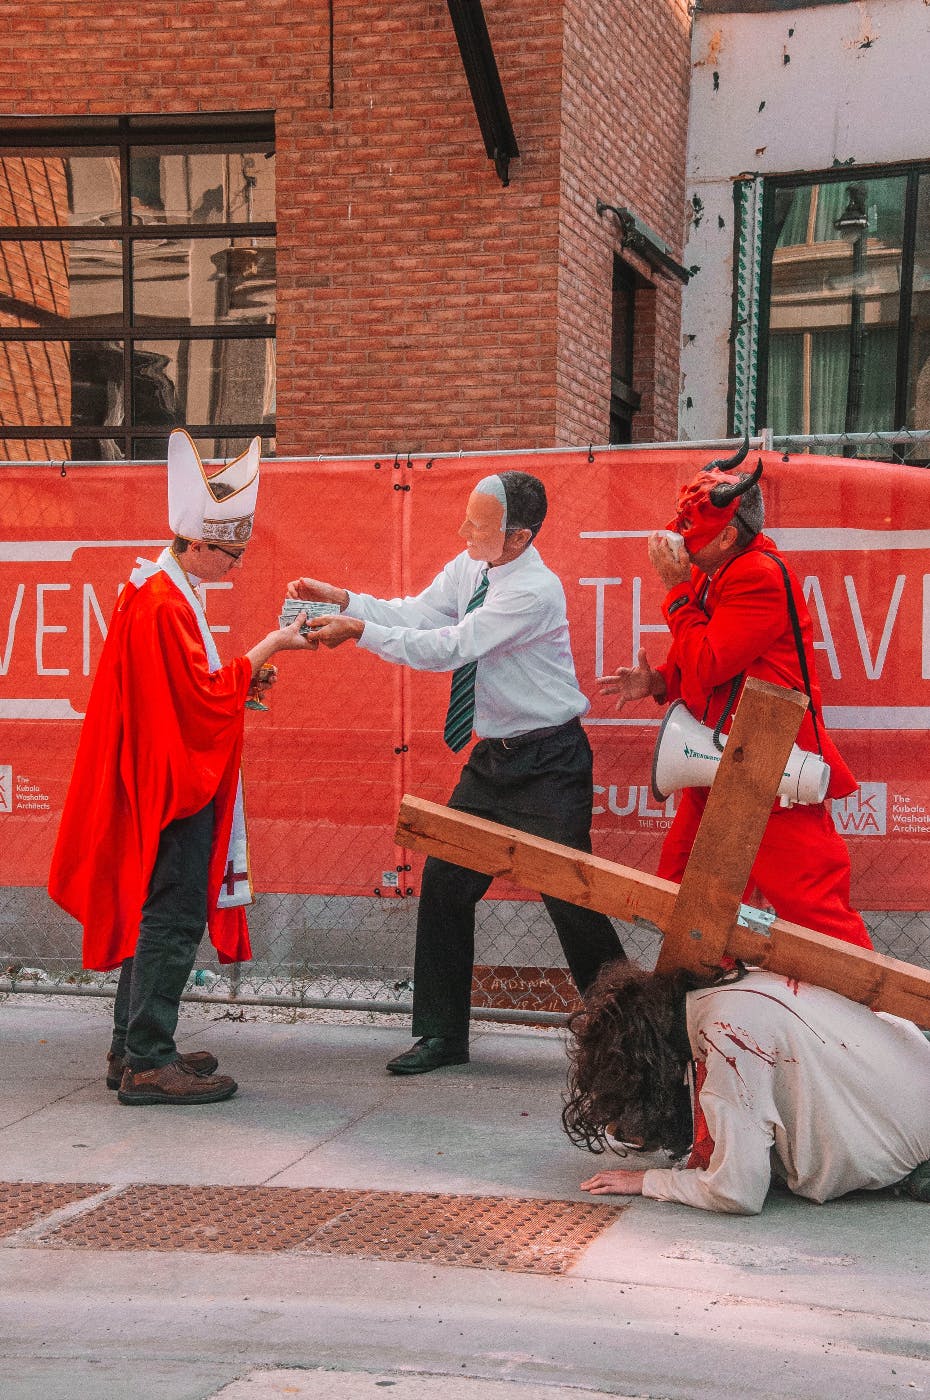 A street performance with a politician, a cardinal, the devil and a bloody man with a cross